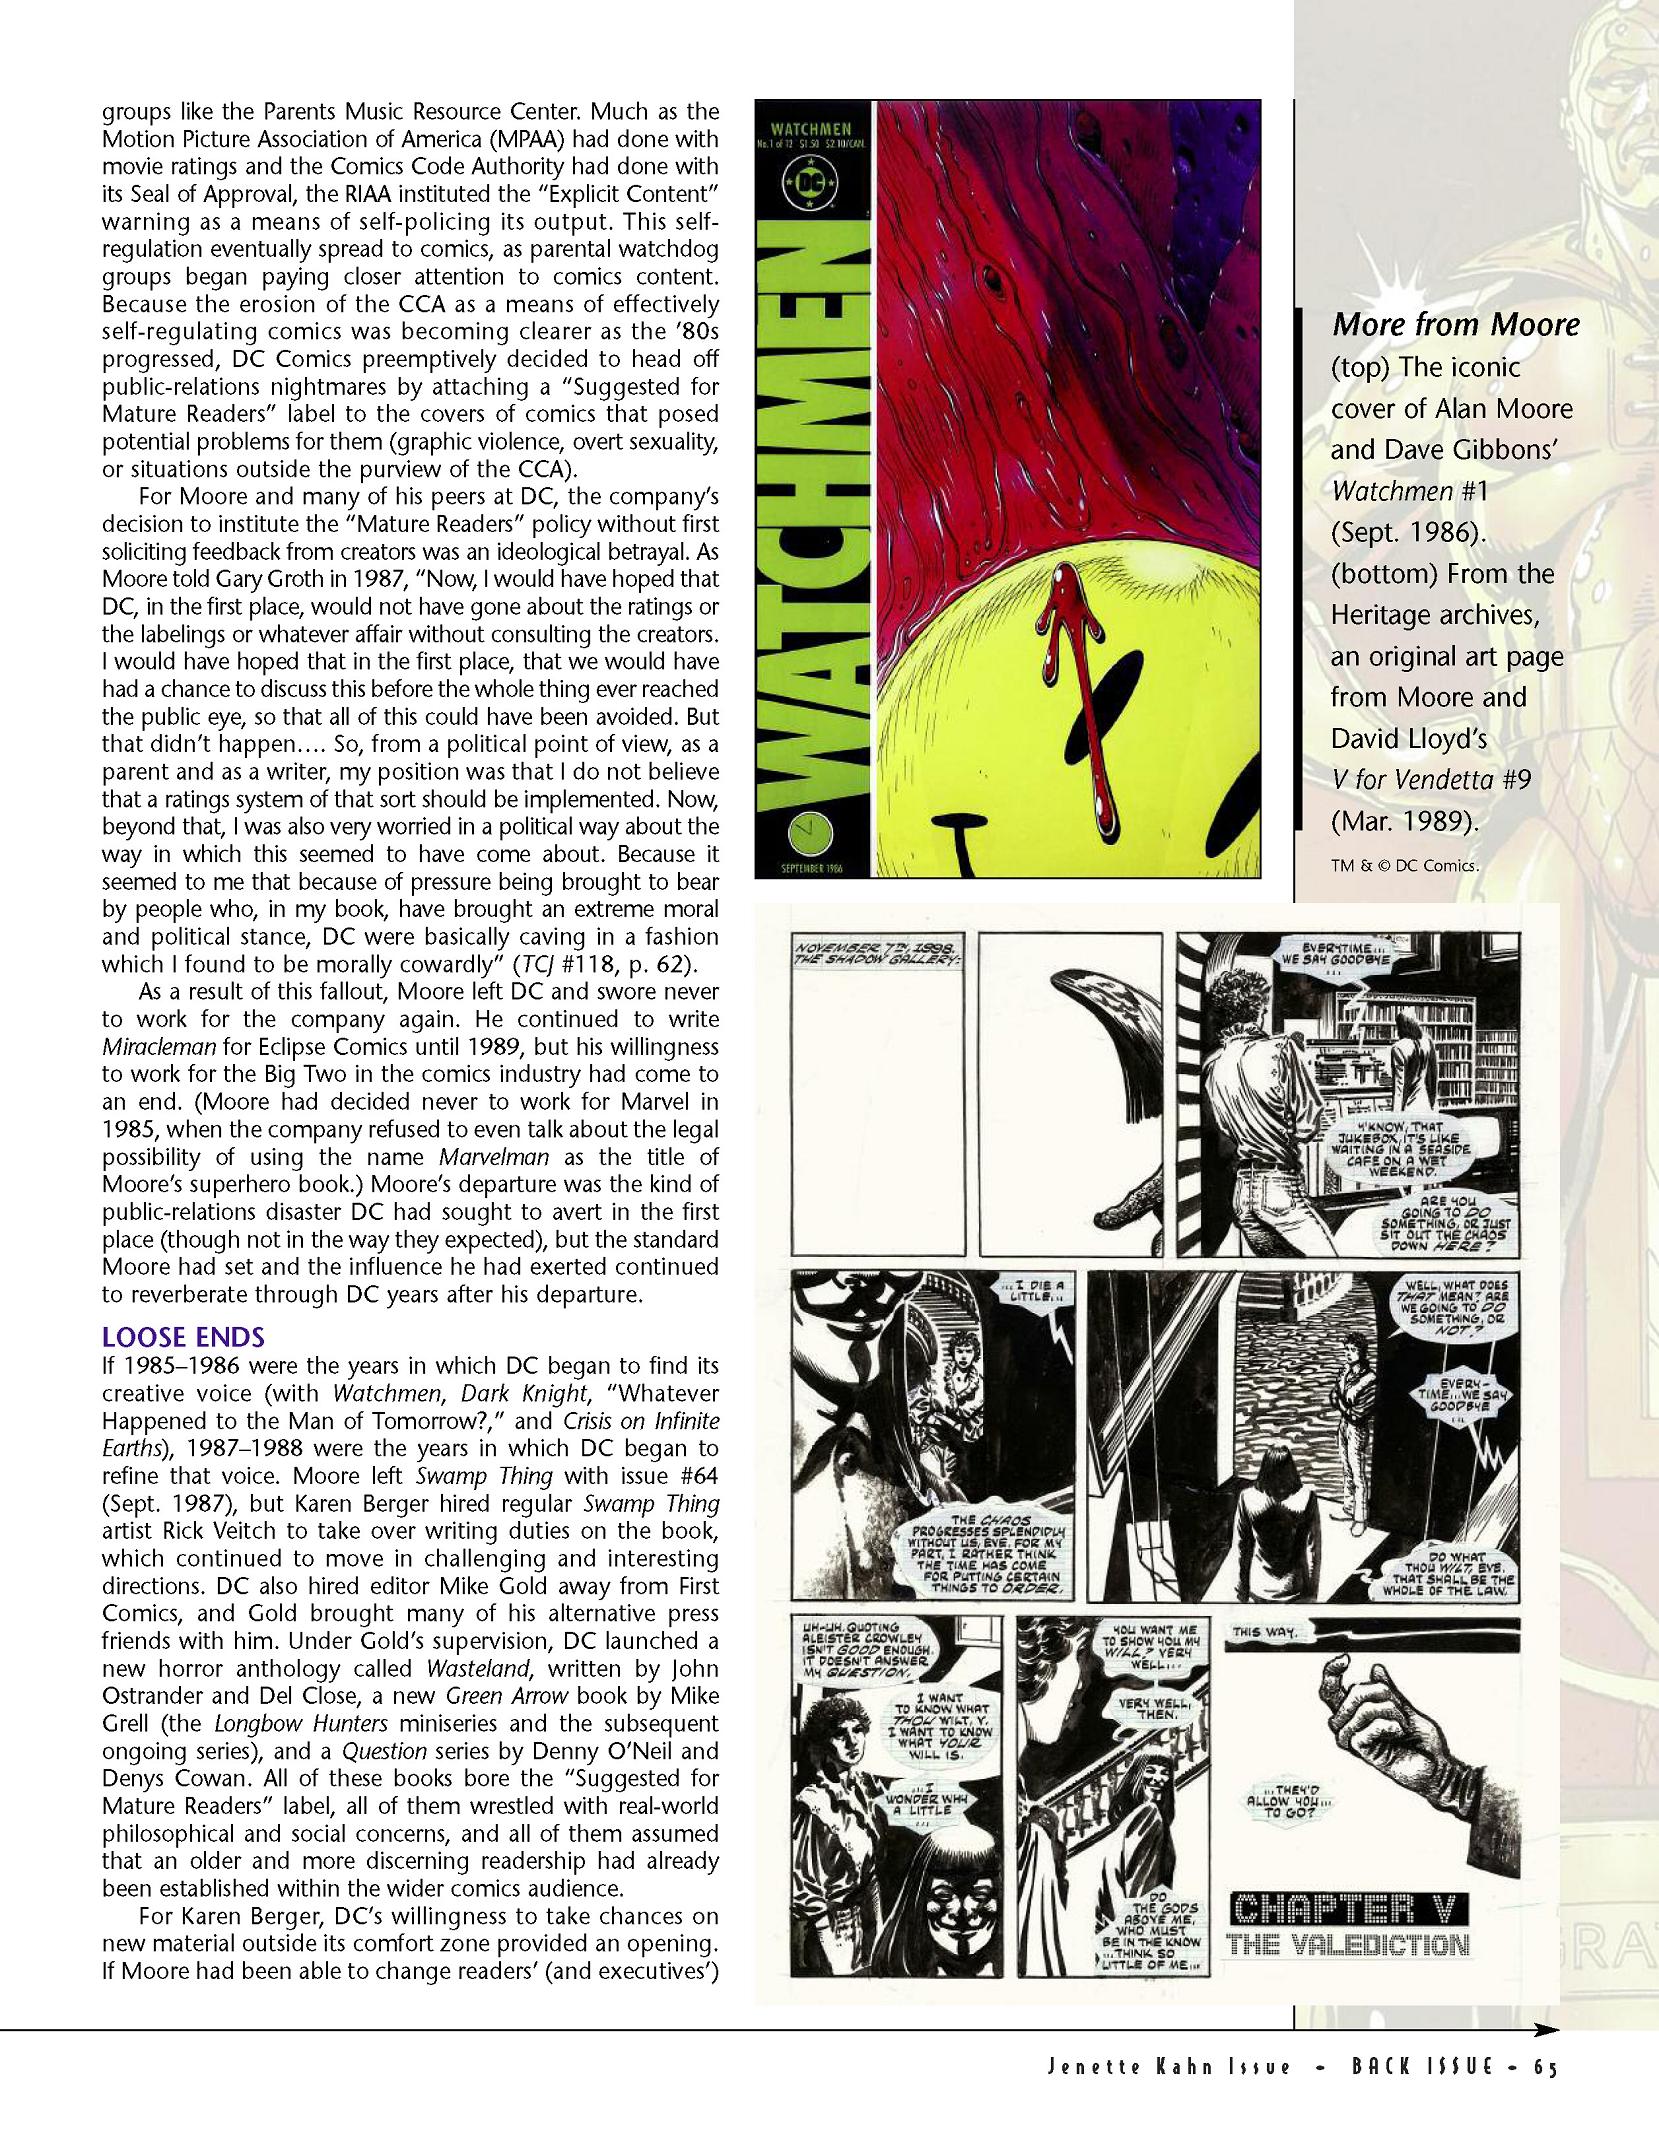 Read online Back Issue comic -  Issue #57 - 64